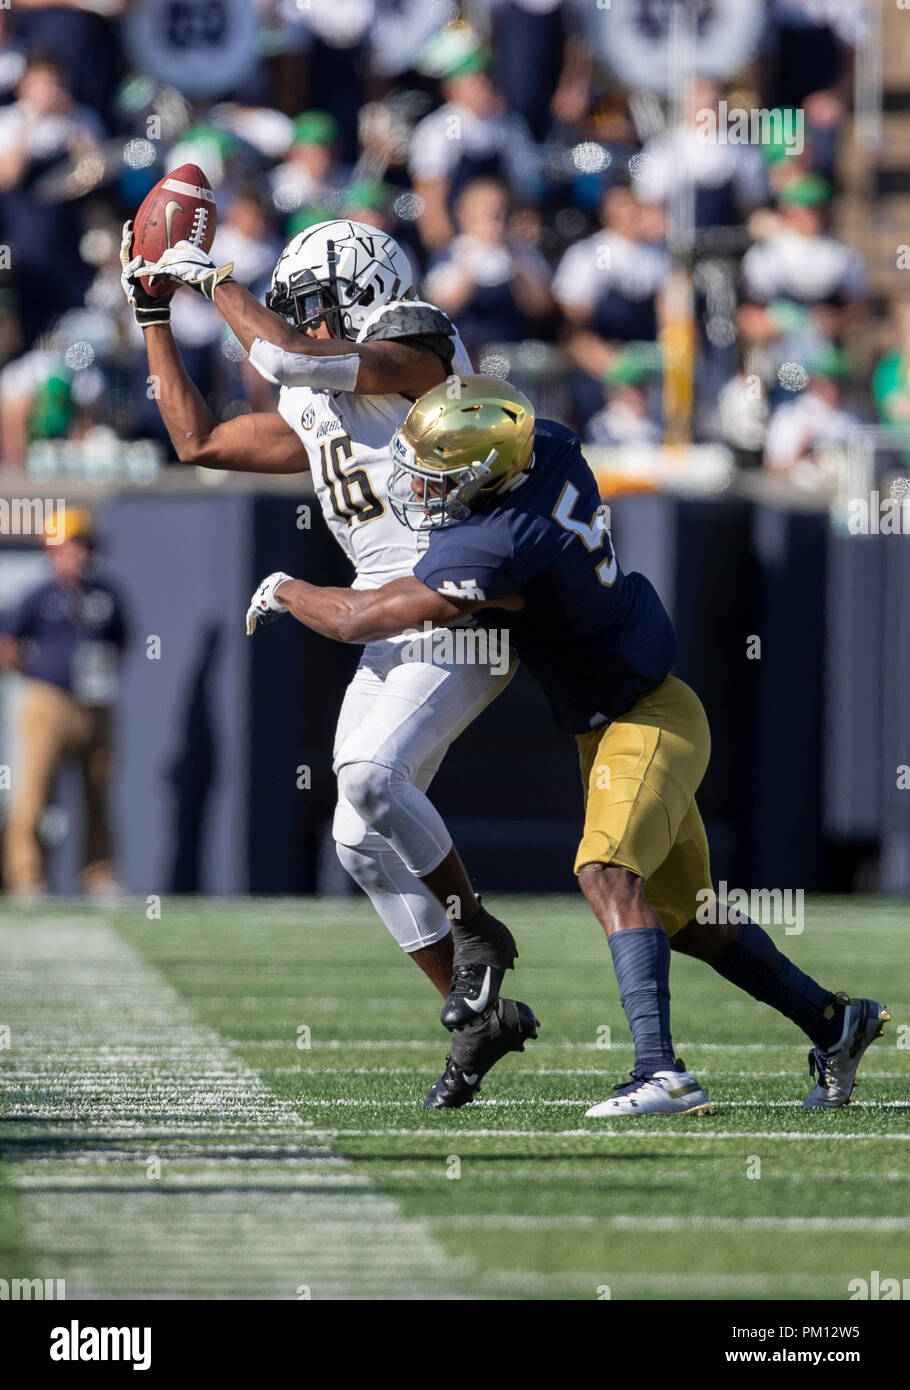 South Bend, Indiana, USA. 15th Sep, 2018. Vanderbilt wide receiver Kalija Lipscomb (16) makes the catch as Notre Dame defensive back Troy Pride Jr. (5) defends during NCAA football game action between the Vanderbilt Commodores and the Notre Dame Fighting Irish at Notre Dame Stadium in South Bend, Indiana. Notre Dame defeated Vanderbilt 22-17. John Mersits/CSM/Alamy Live News Stock Photo